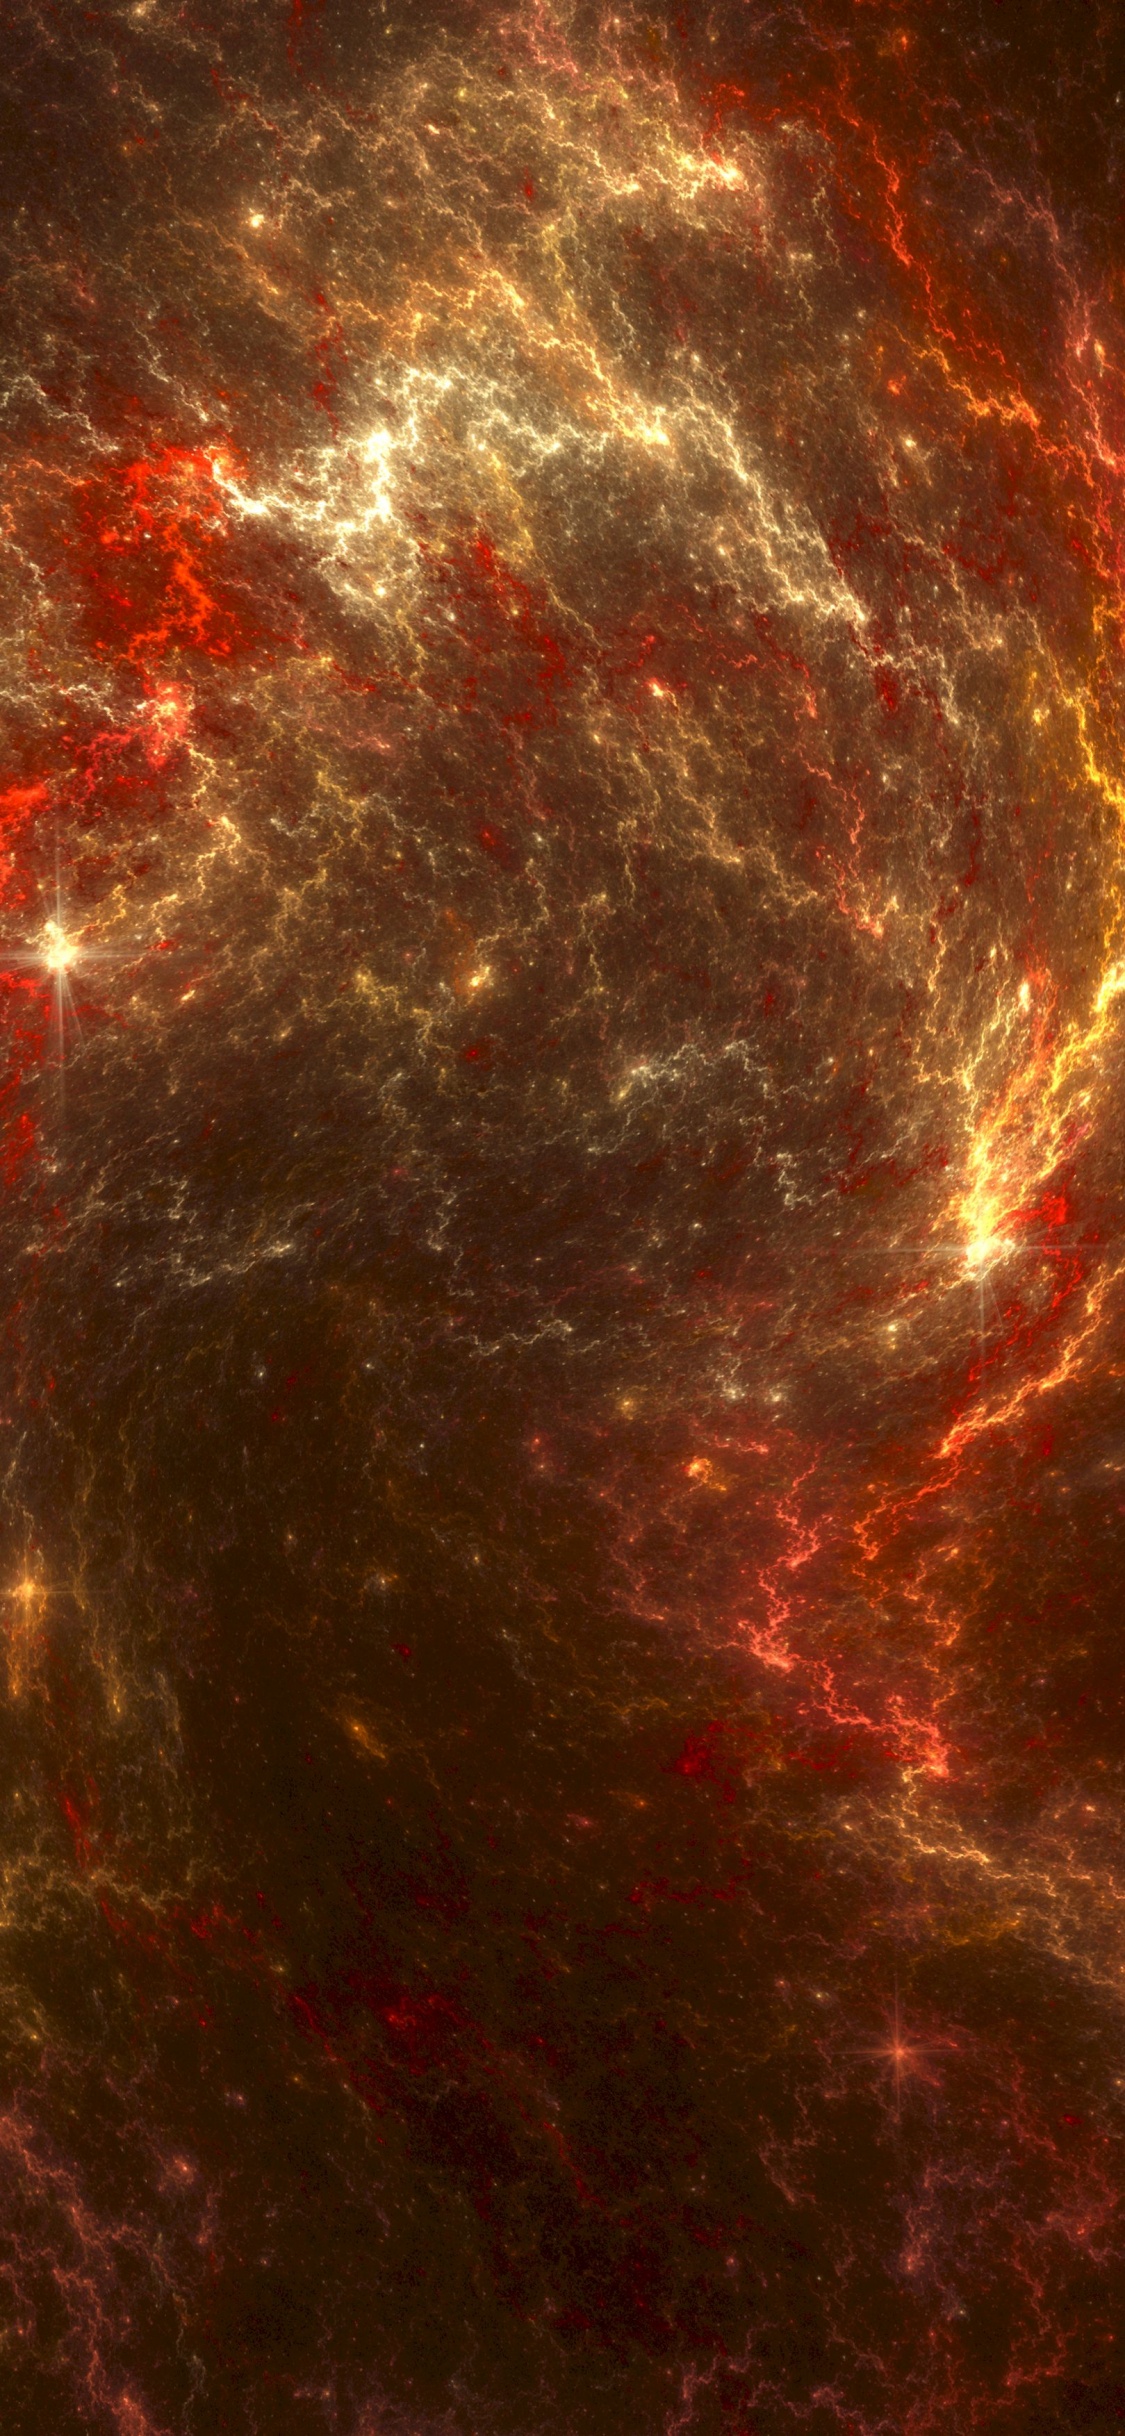 Red and Black Galaxy Illustration. Wallpaper in 1125x2436 Resolution